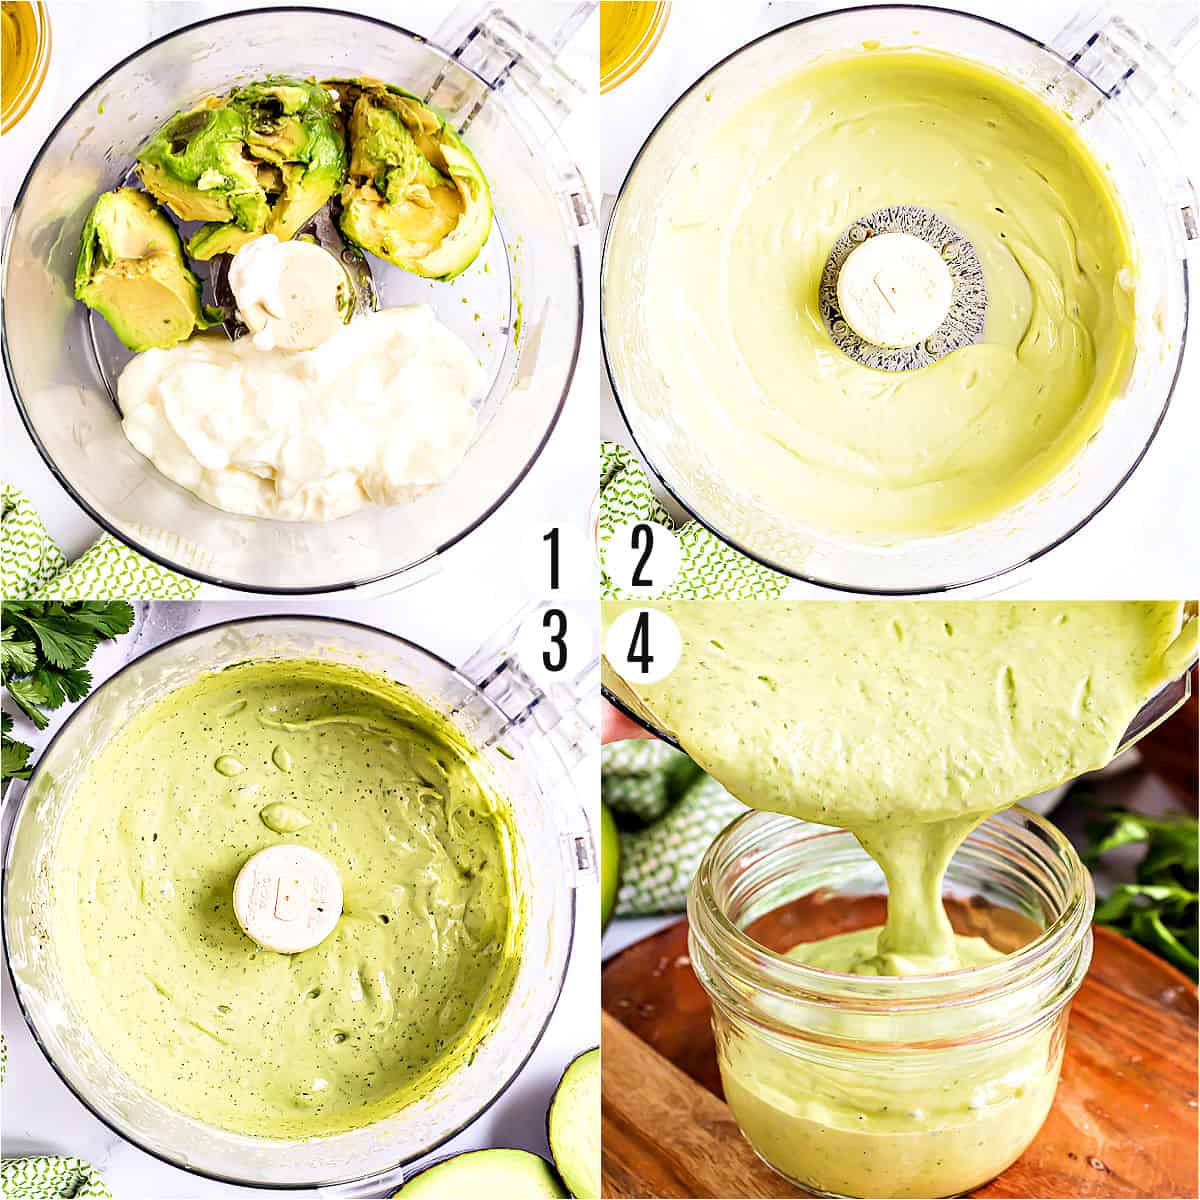 Step by step photos showing how to make avocado salad dressing.